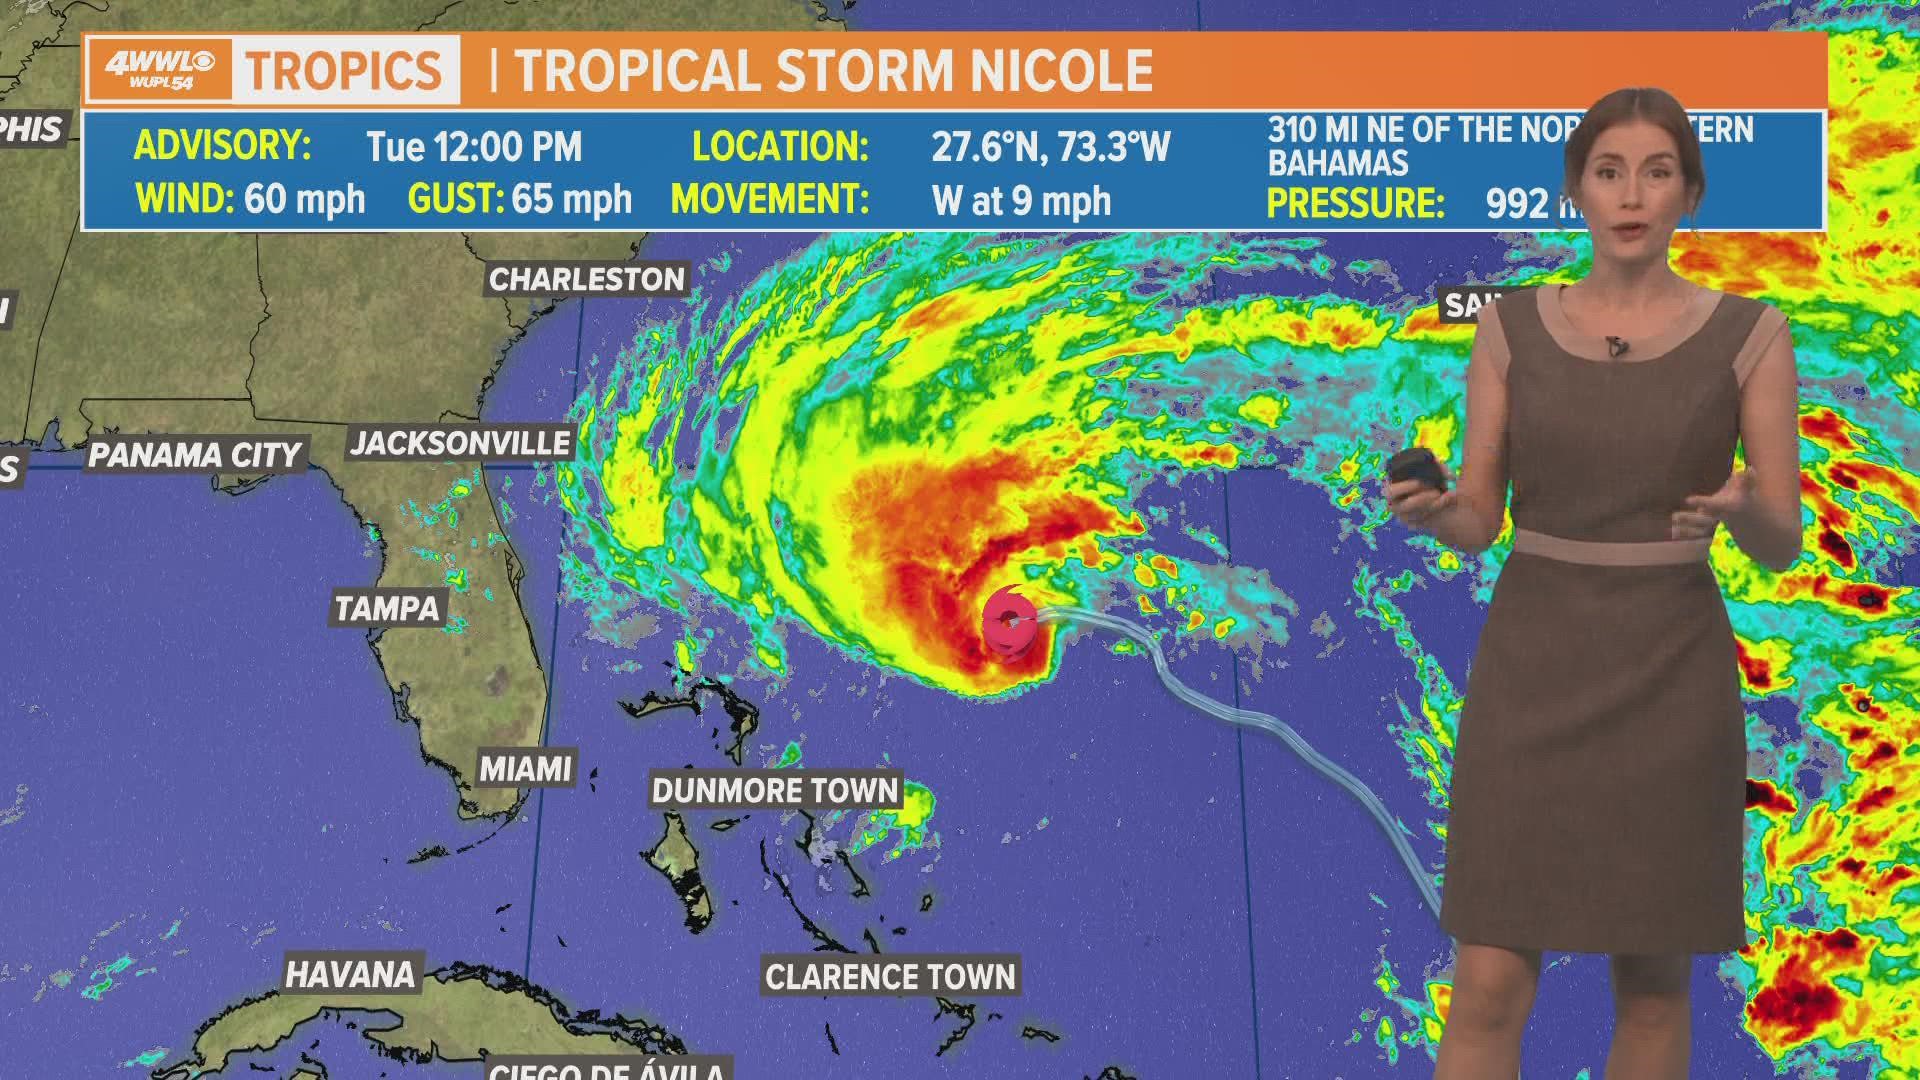 Nicole is now a fully tropical storm and should strengthen into a hurricane before a strike on Florida midweek.